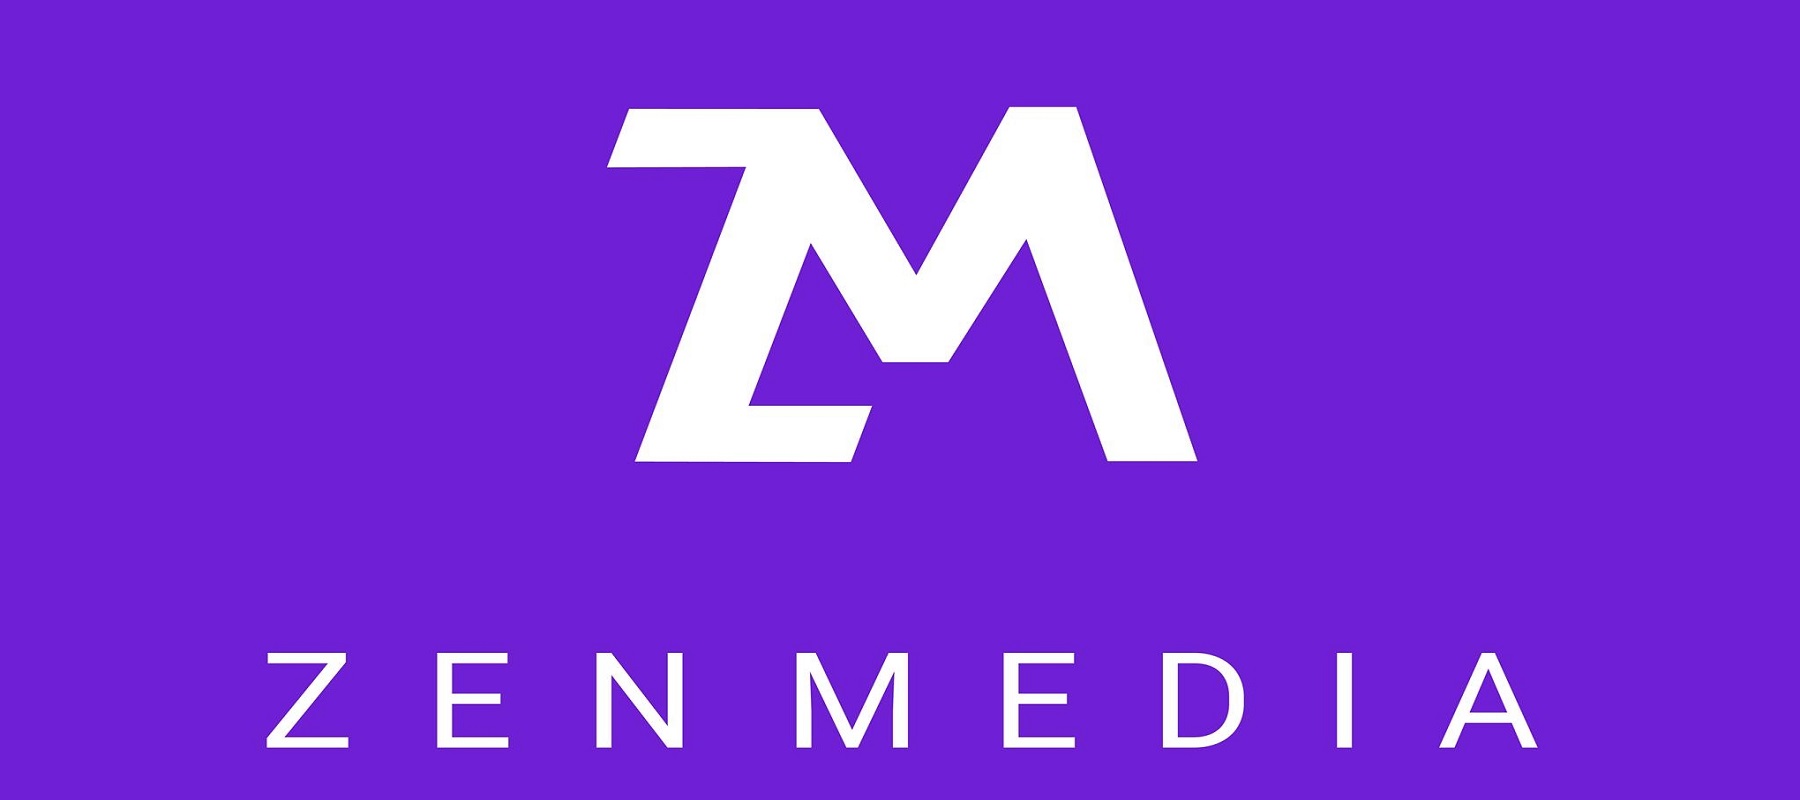 Marketing and PR firm Zen Media launches generative AI tool to predict newsworthiness